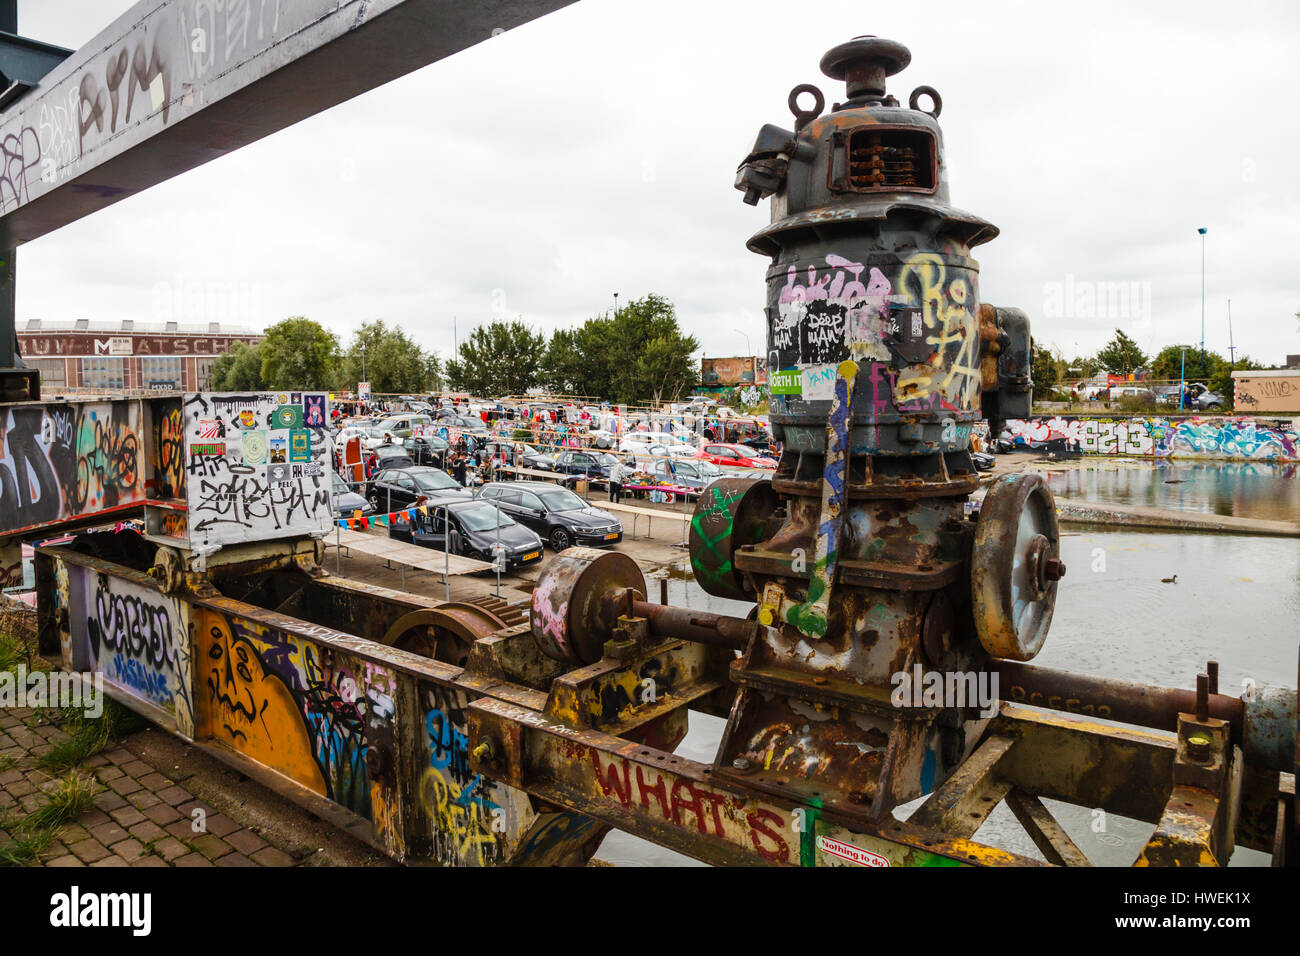 Graffiti scrawled over derelit machinery on the NDSM wharf in Amsterdam.  A regular fleamarket can be seen in the background Stock Photo